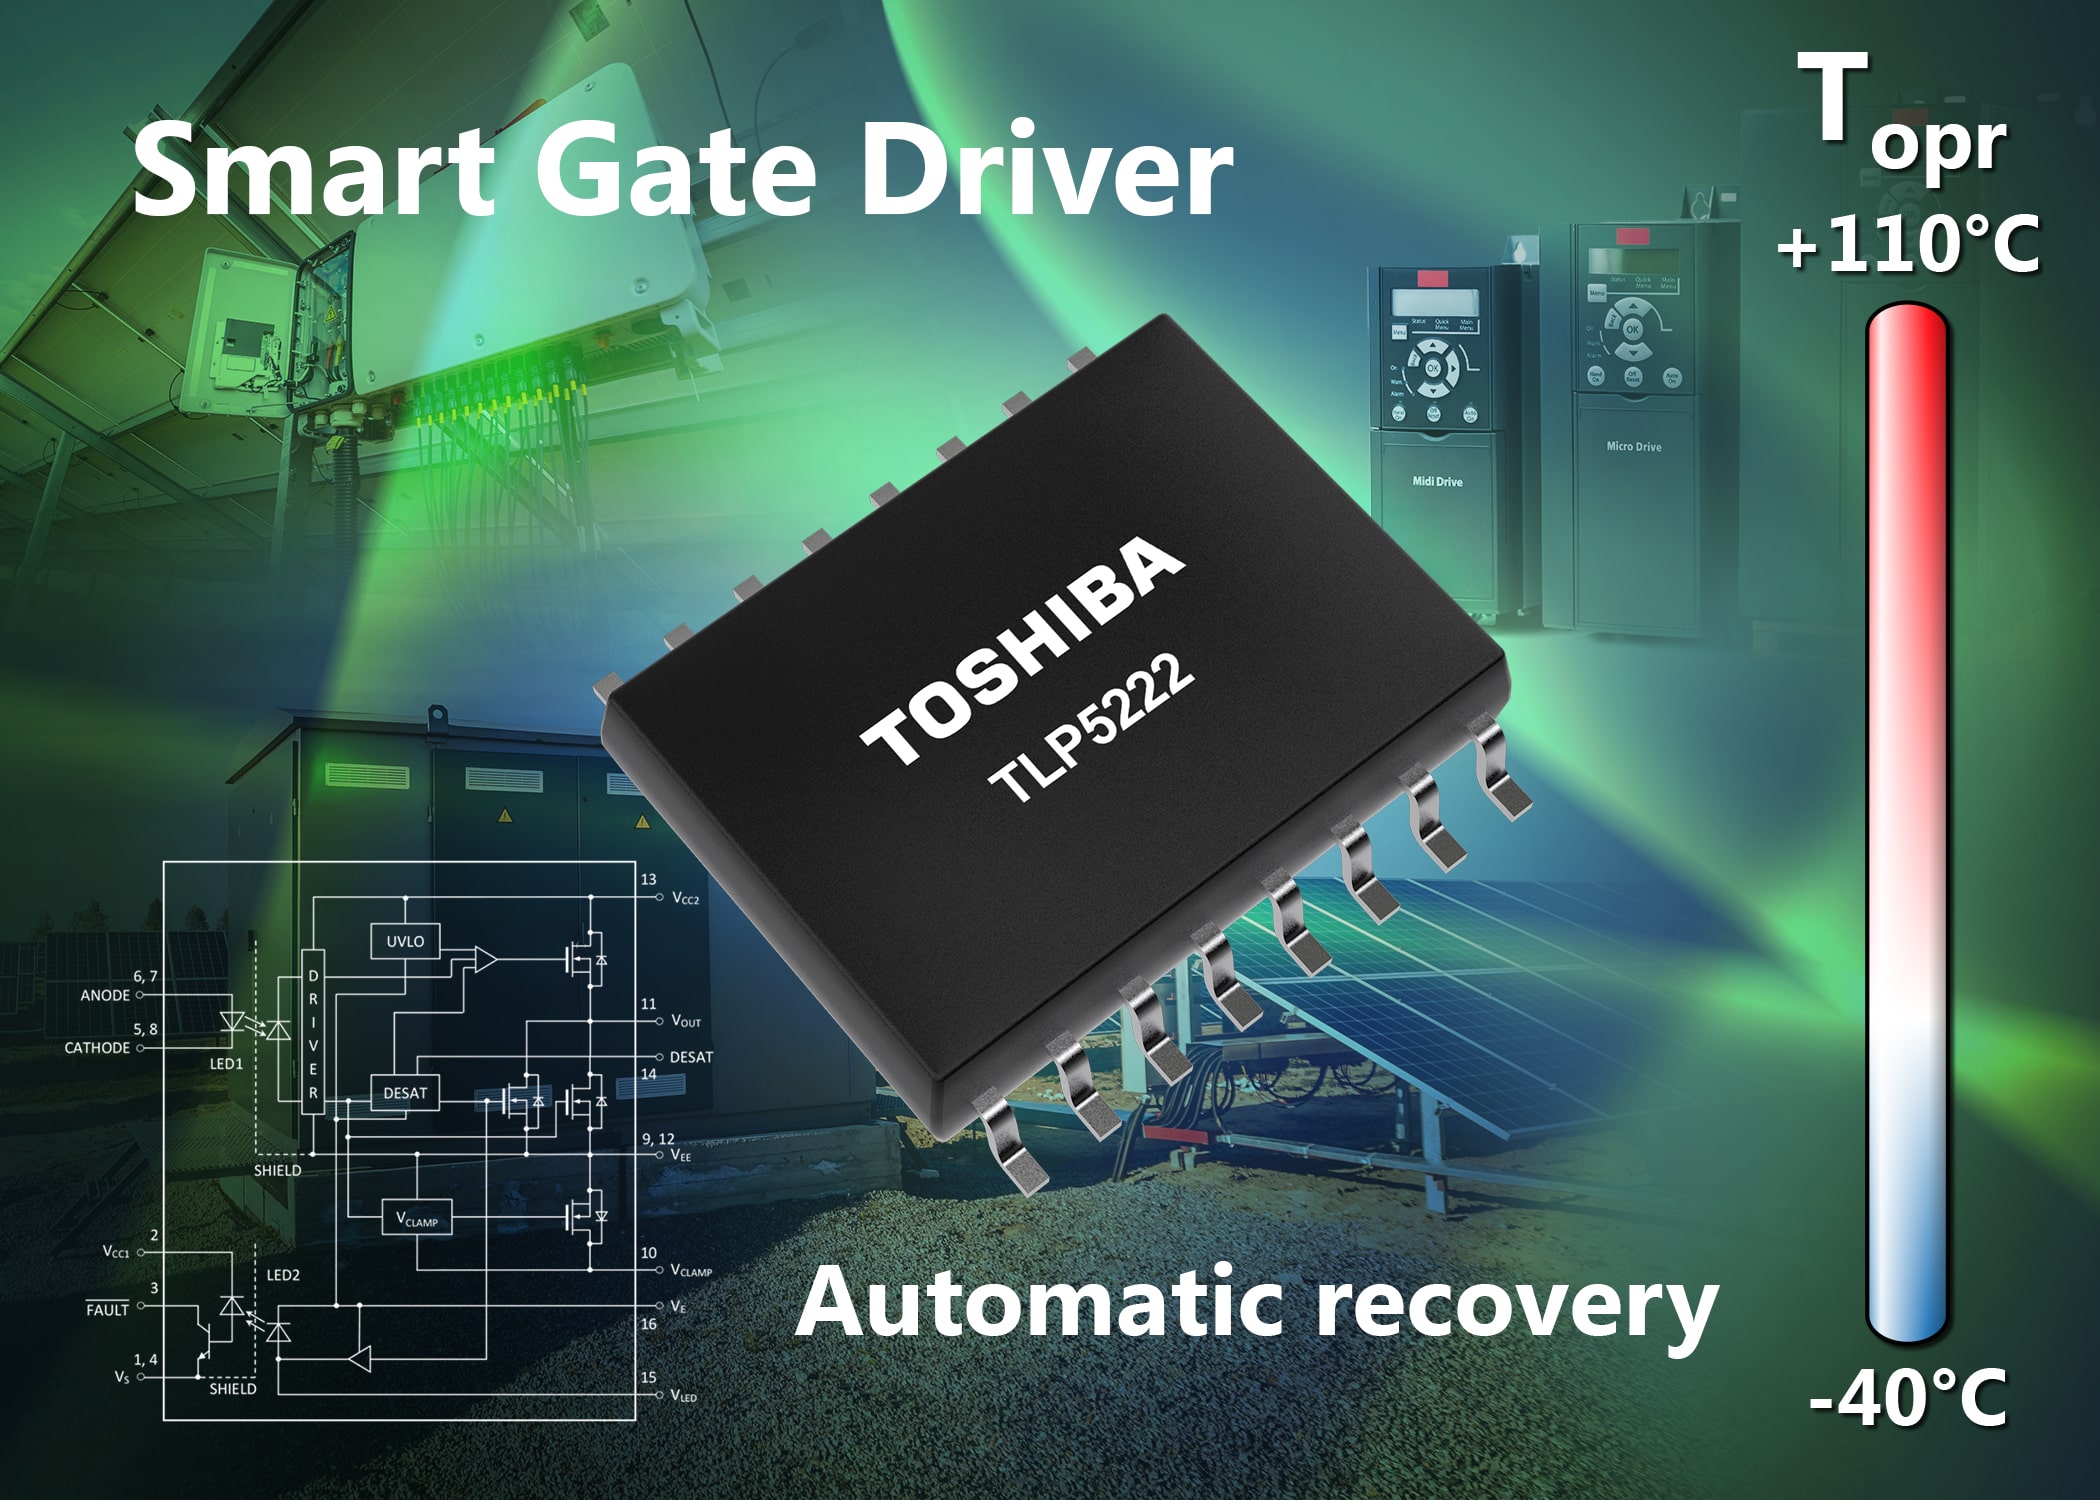 Toshiba Introduces First Smart Gate Driver Photocoupler with Automatic Recovery Function